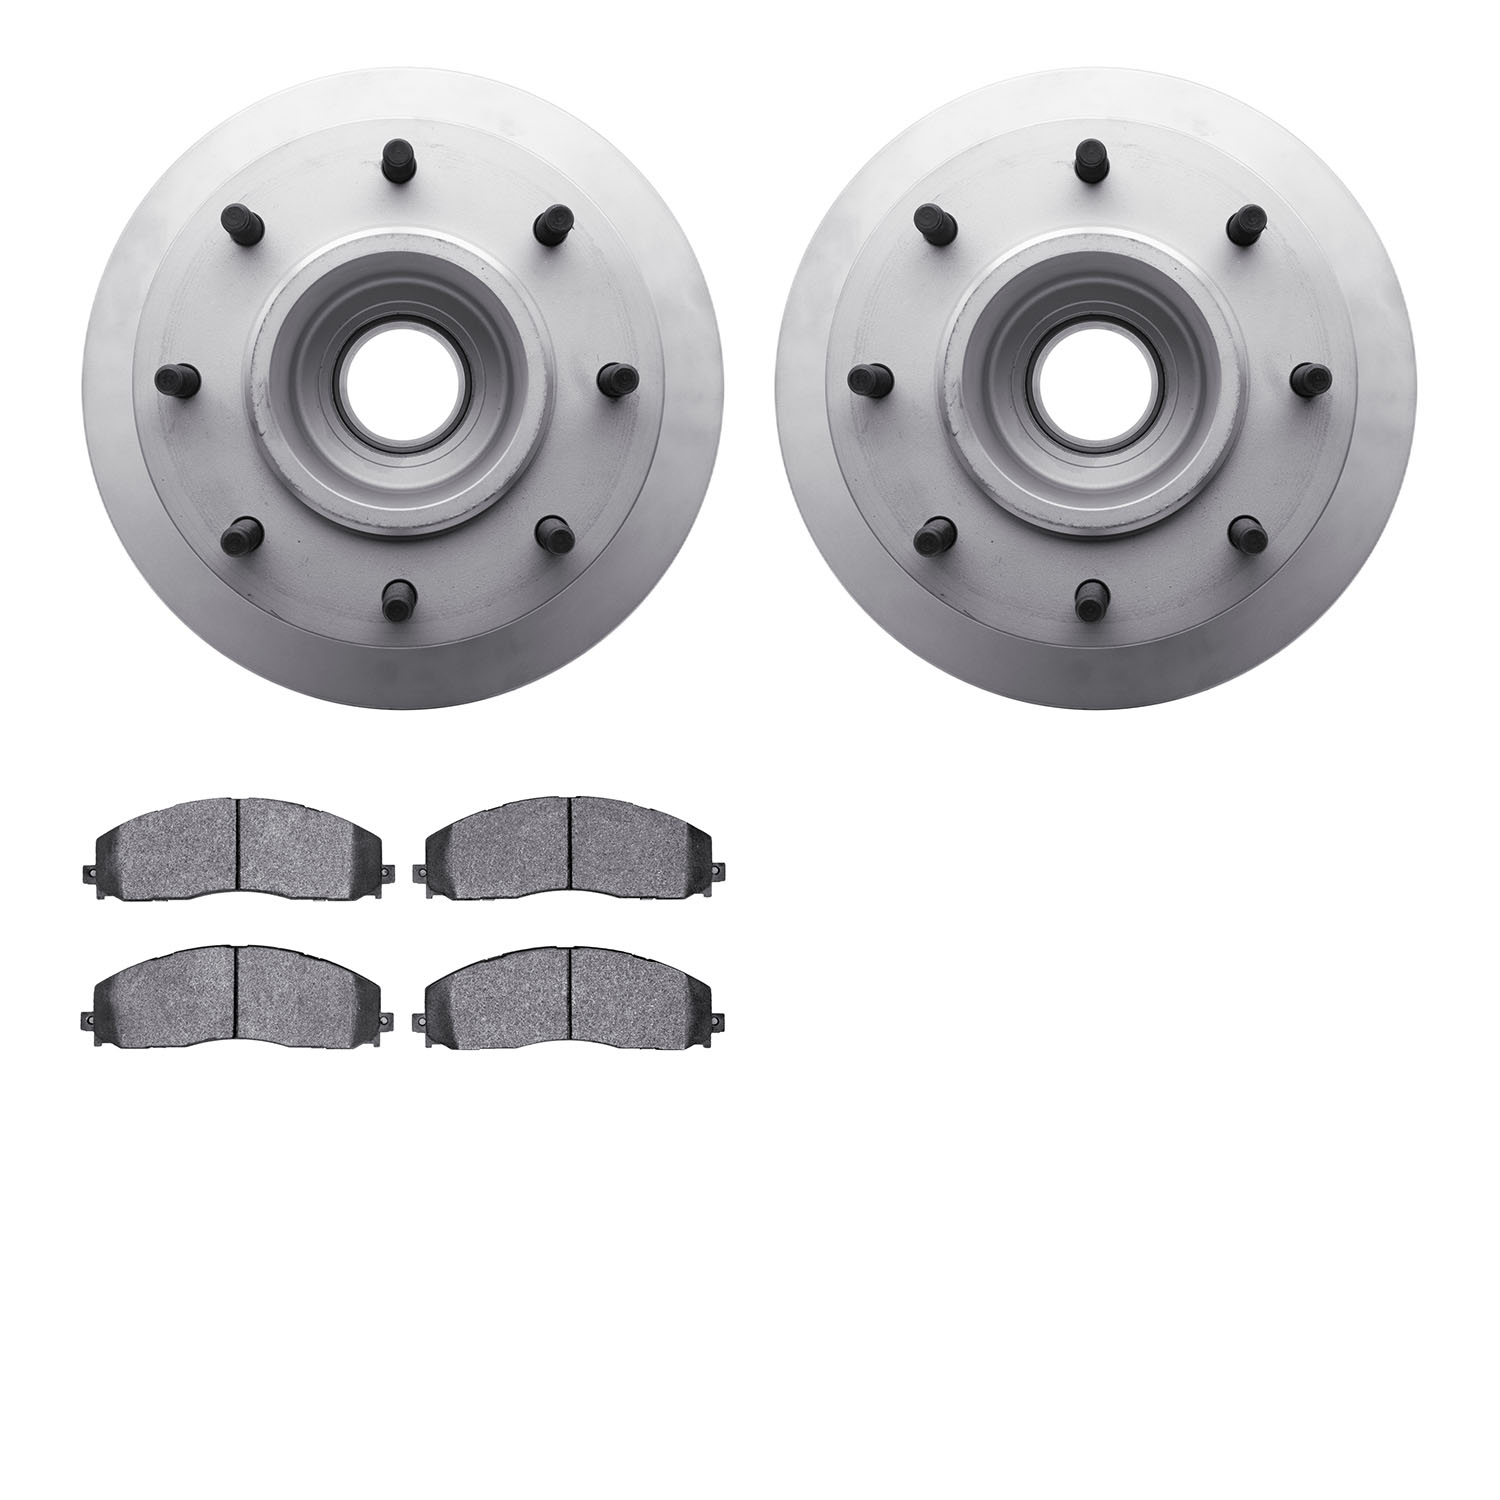 4202-99194 Geospec Brake Rotors w/Heavy-Duty Brake Pads Kit, Fits Select Ford/Lincoln/Mercury/Mazda, Position: Front